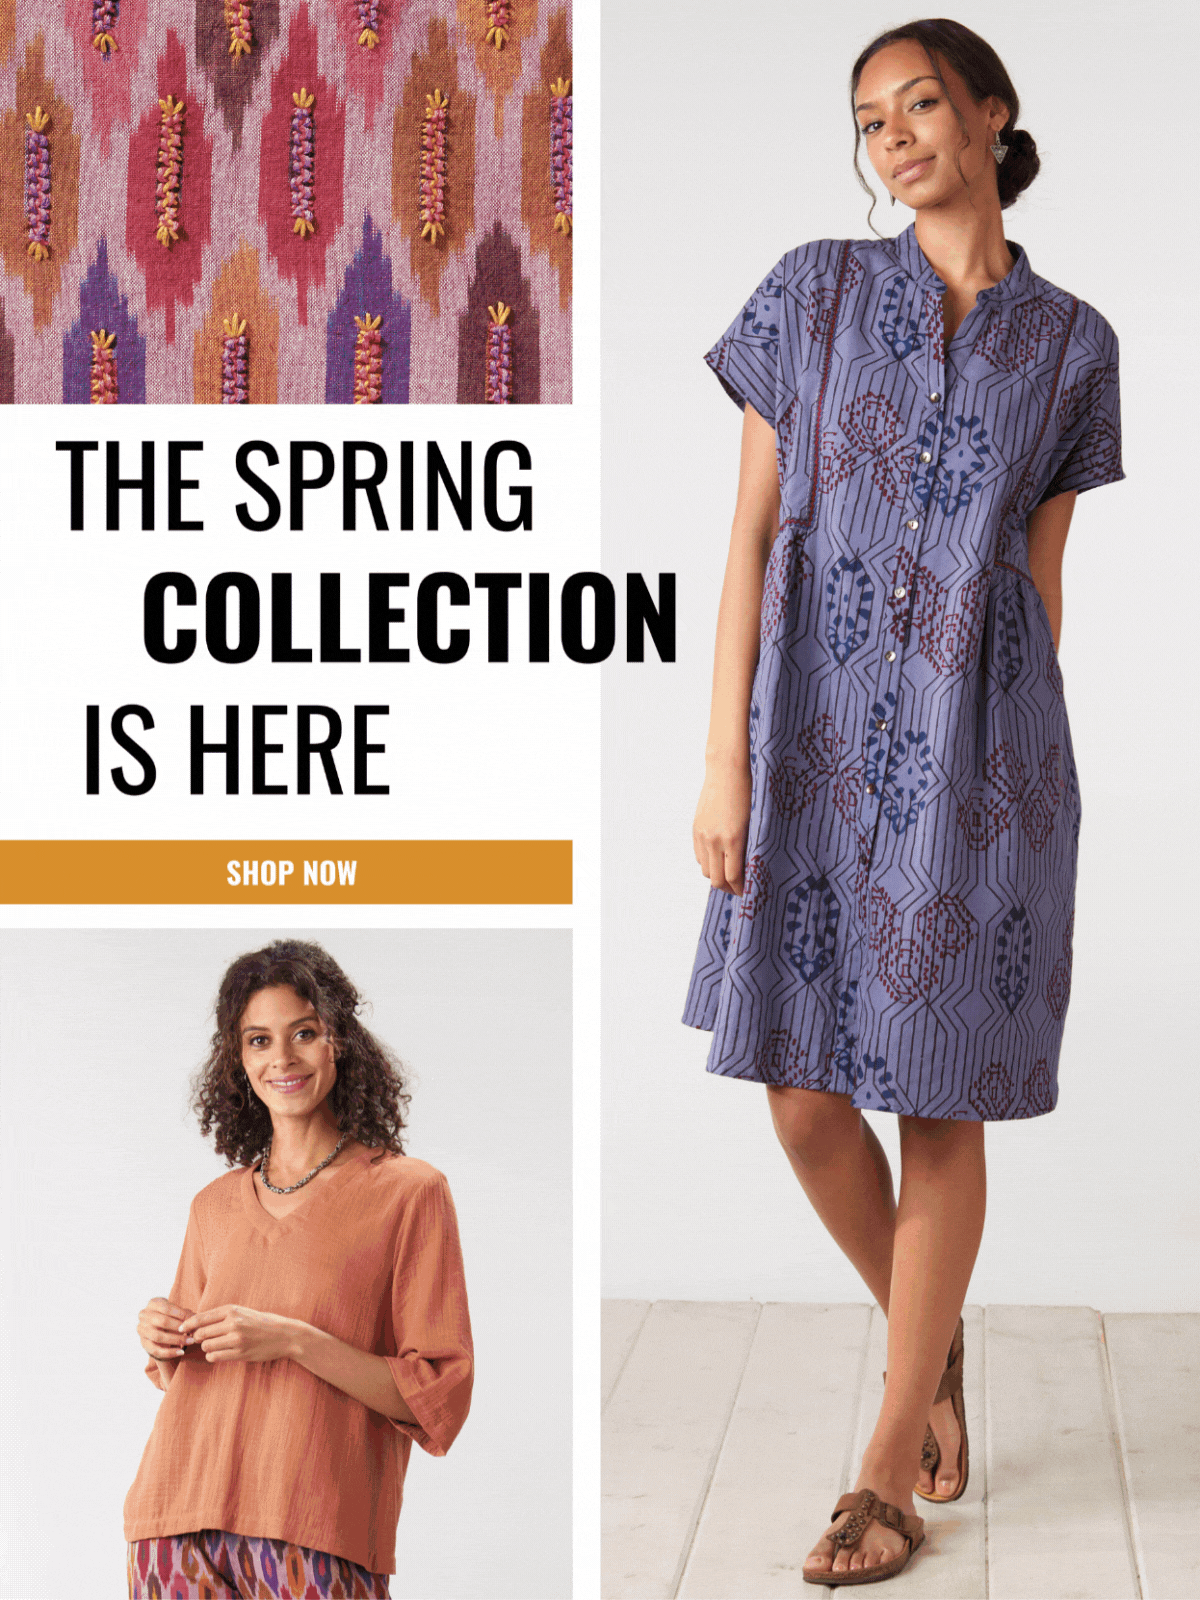 THE SPRING COLLECTION IS HERE SHOP NOW